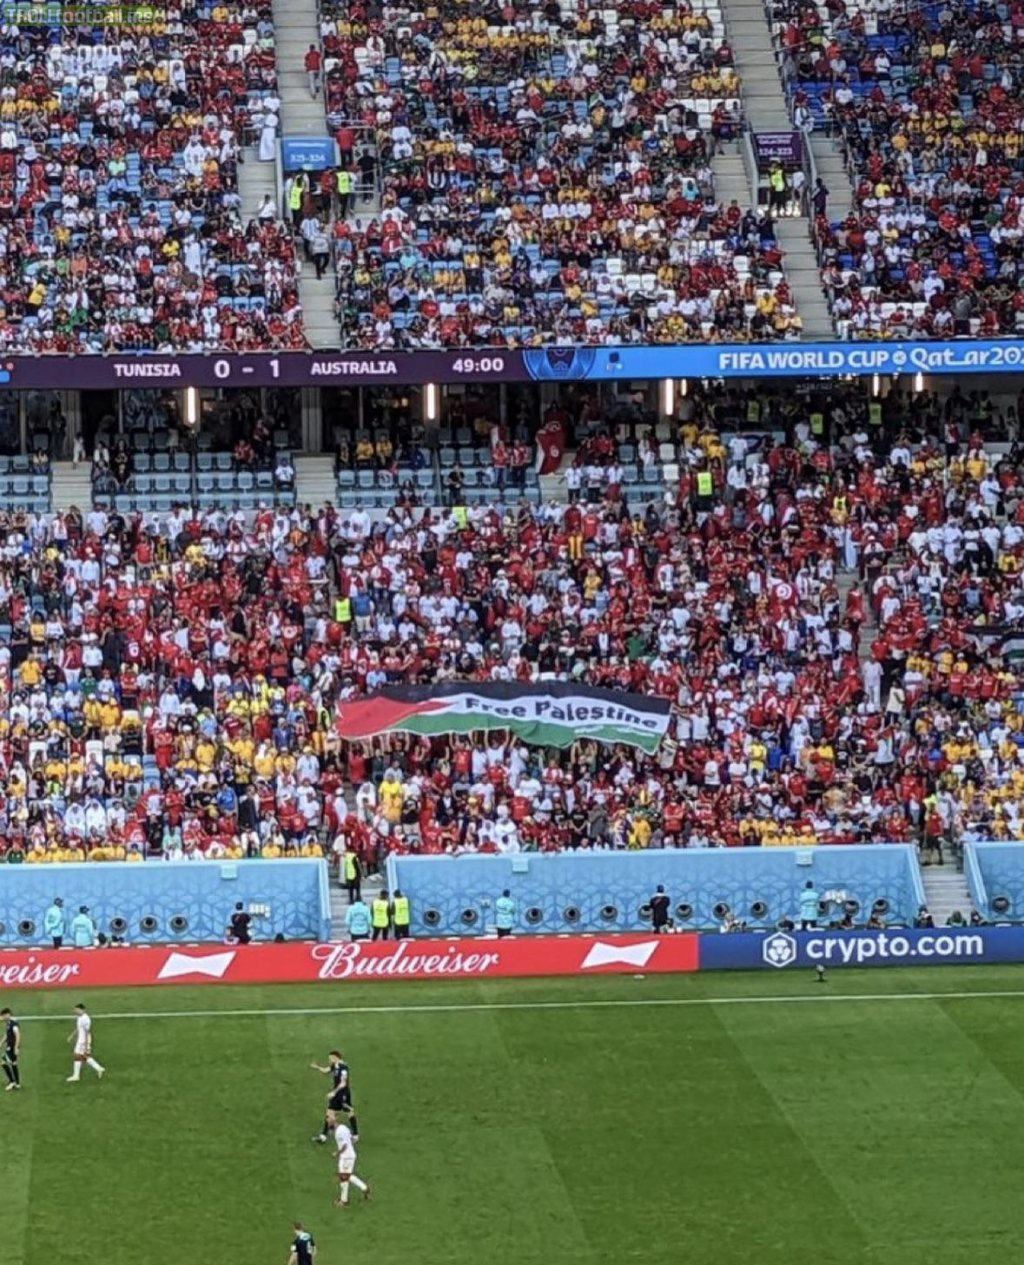 Tunisia fans unveil “Free Palestine” banner at the World Cup in their match against Australia